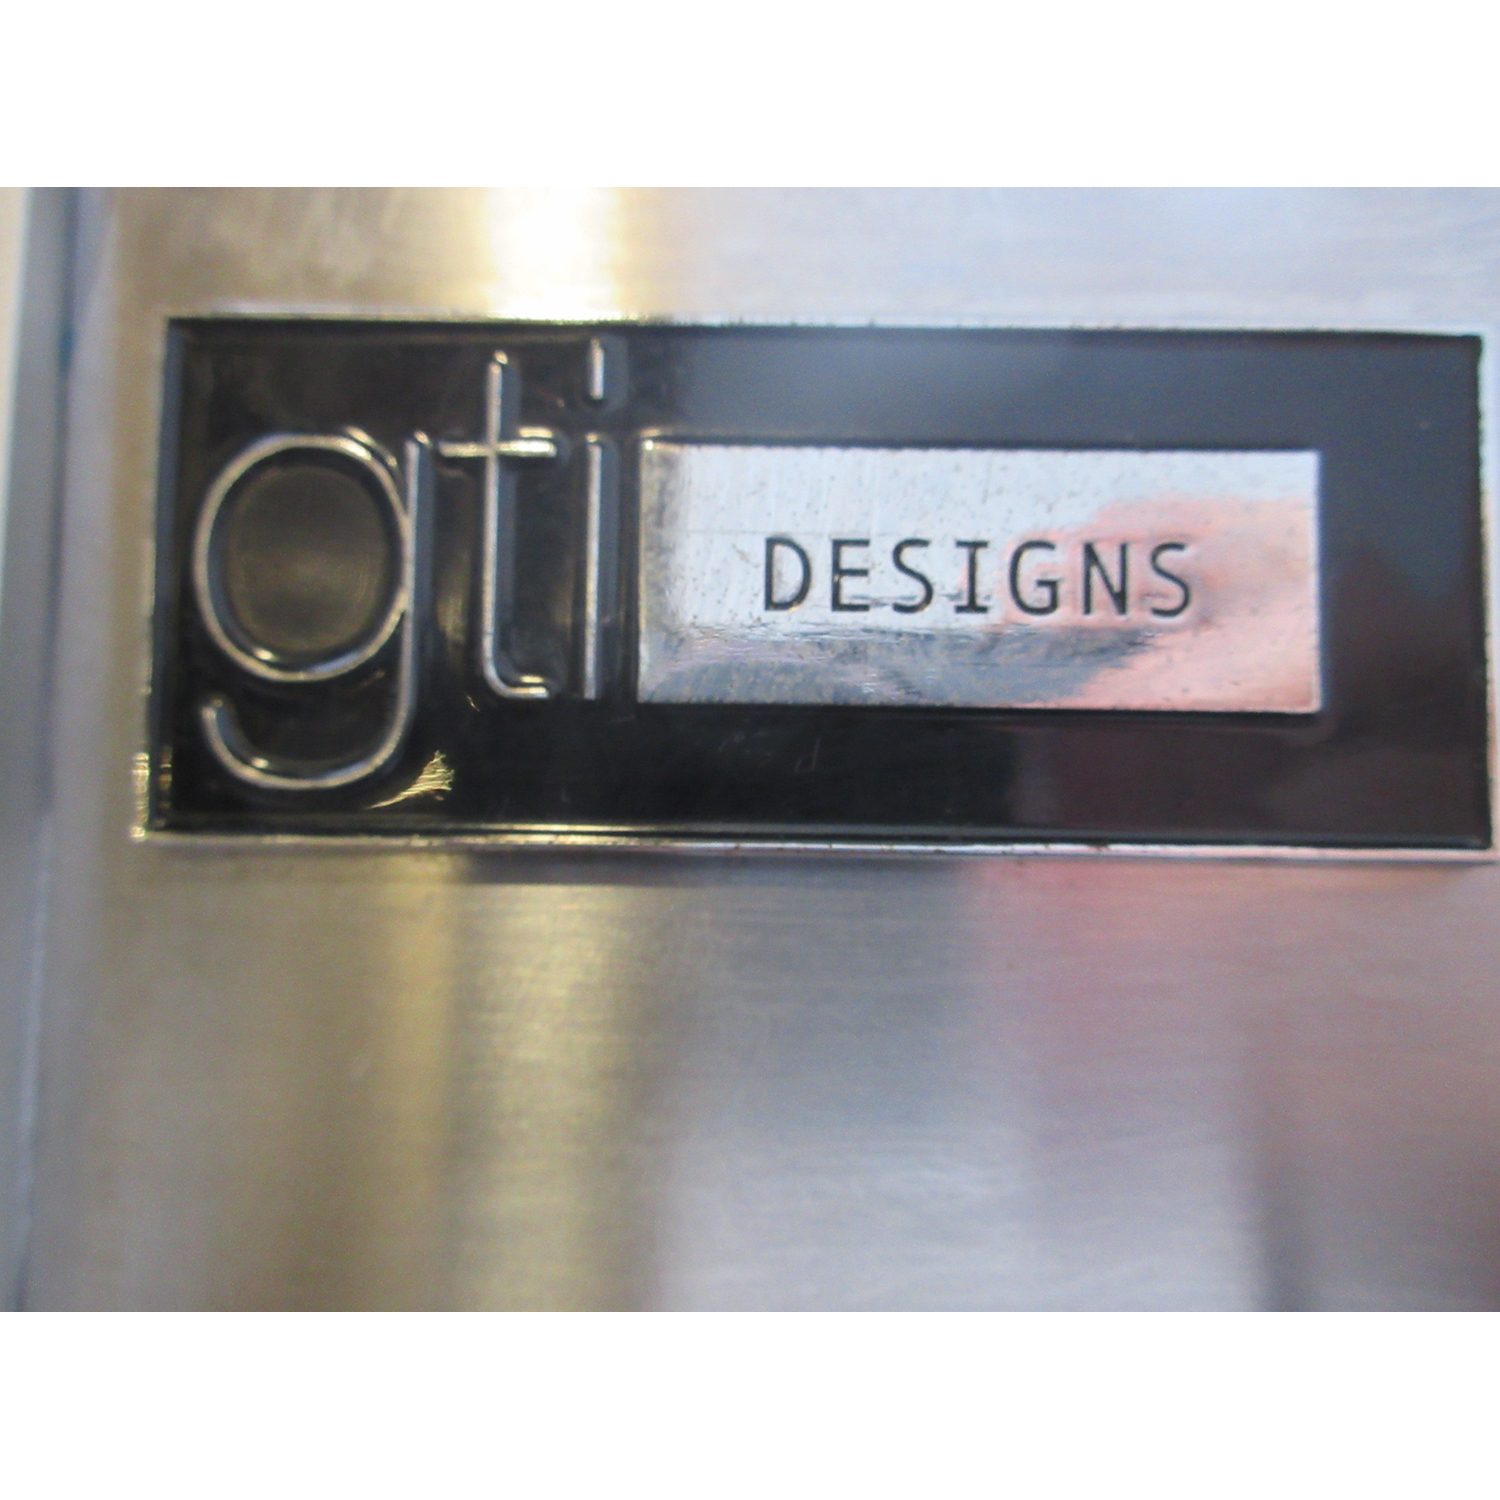 Jordao / GTI Design MPSL-130 Refrigerator Open Case 51.2"W, Used Excellent Condition image 6